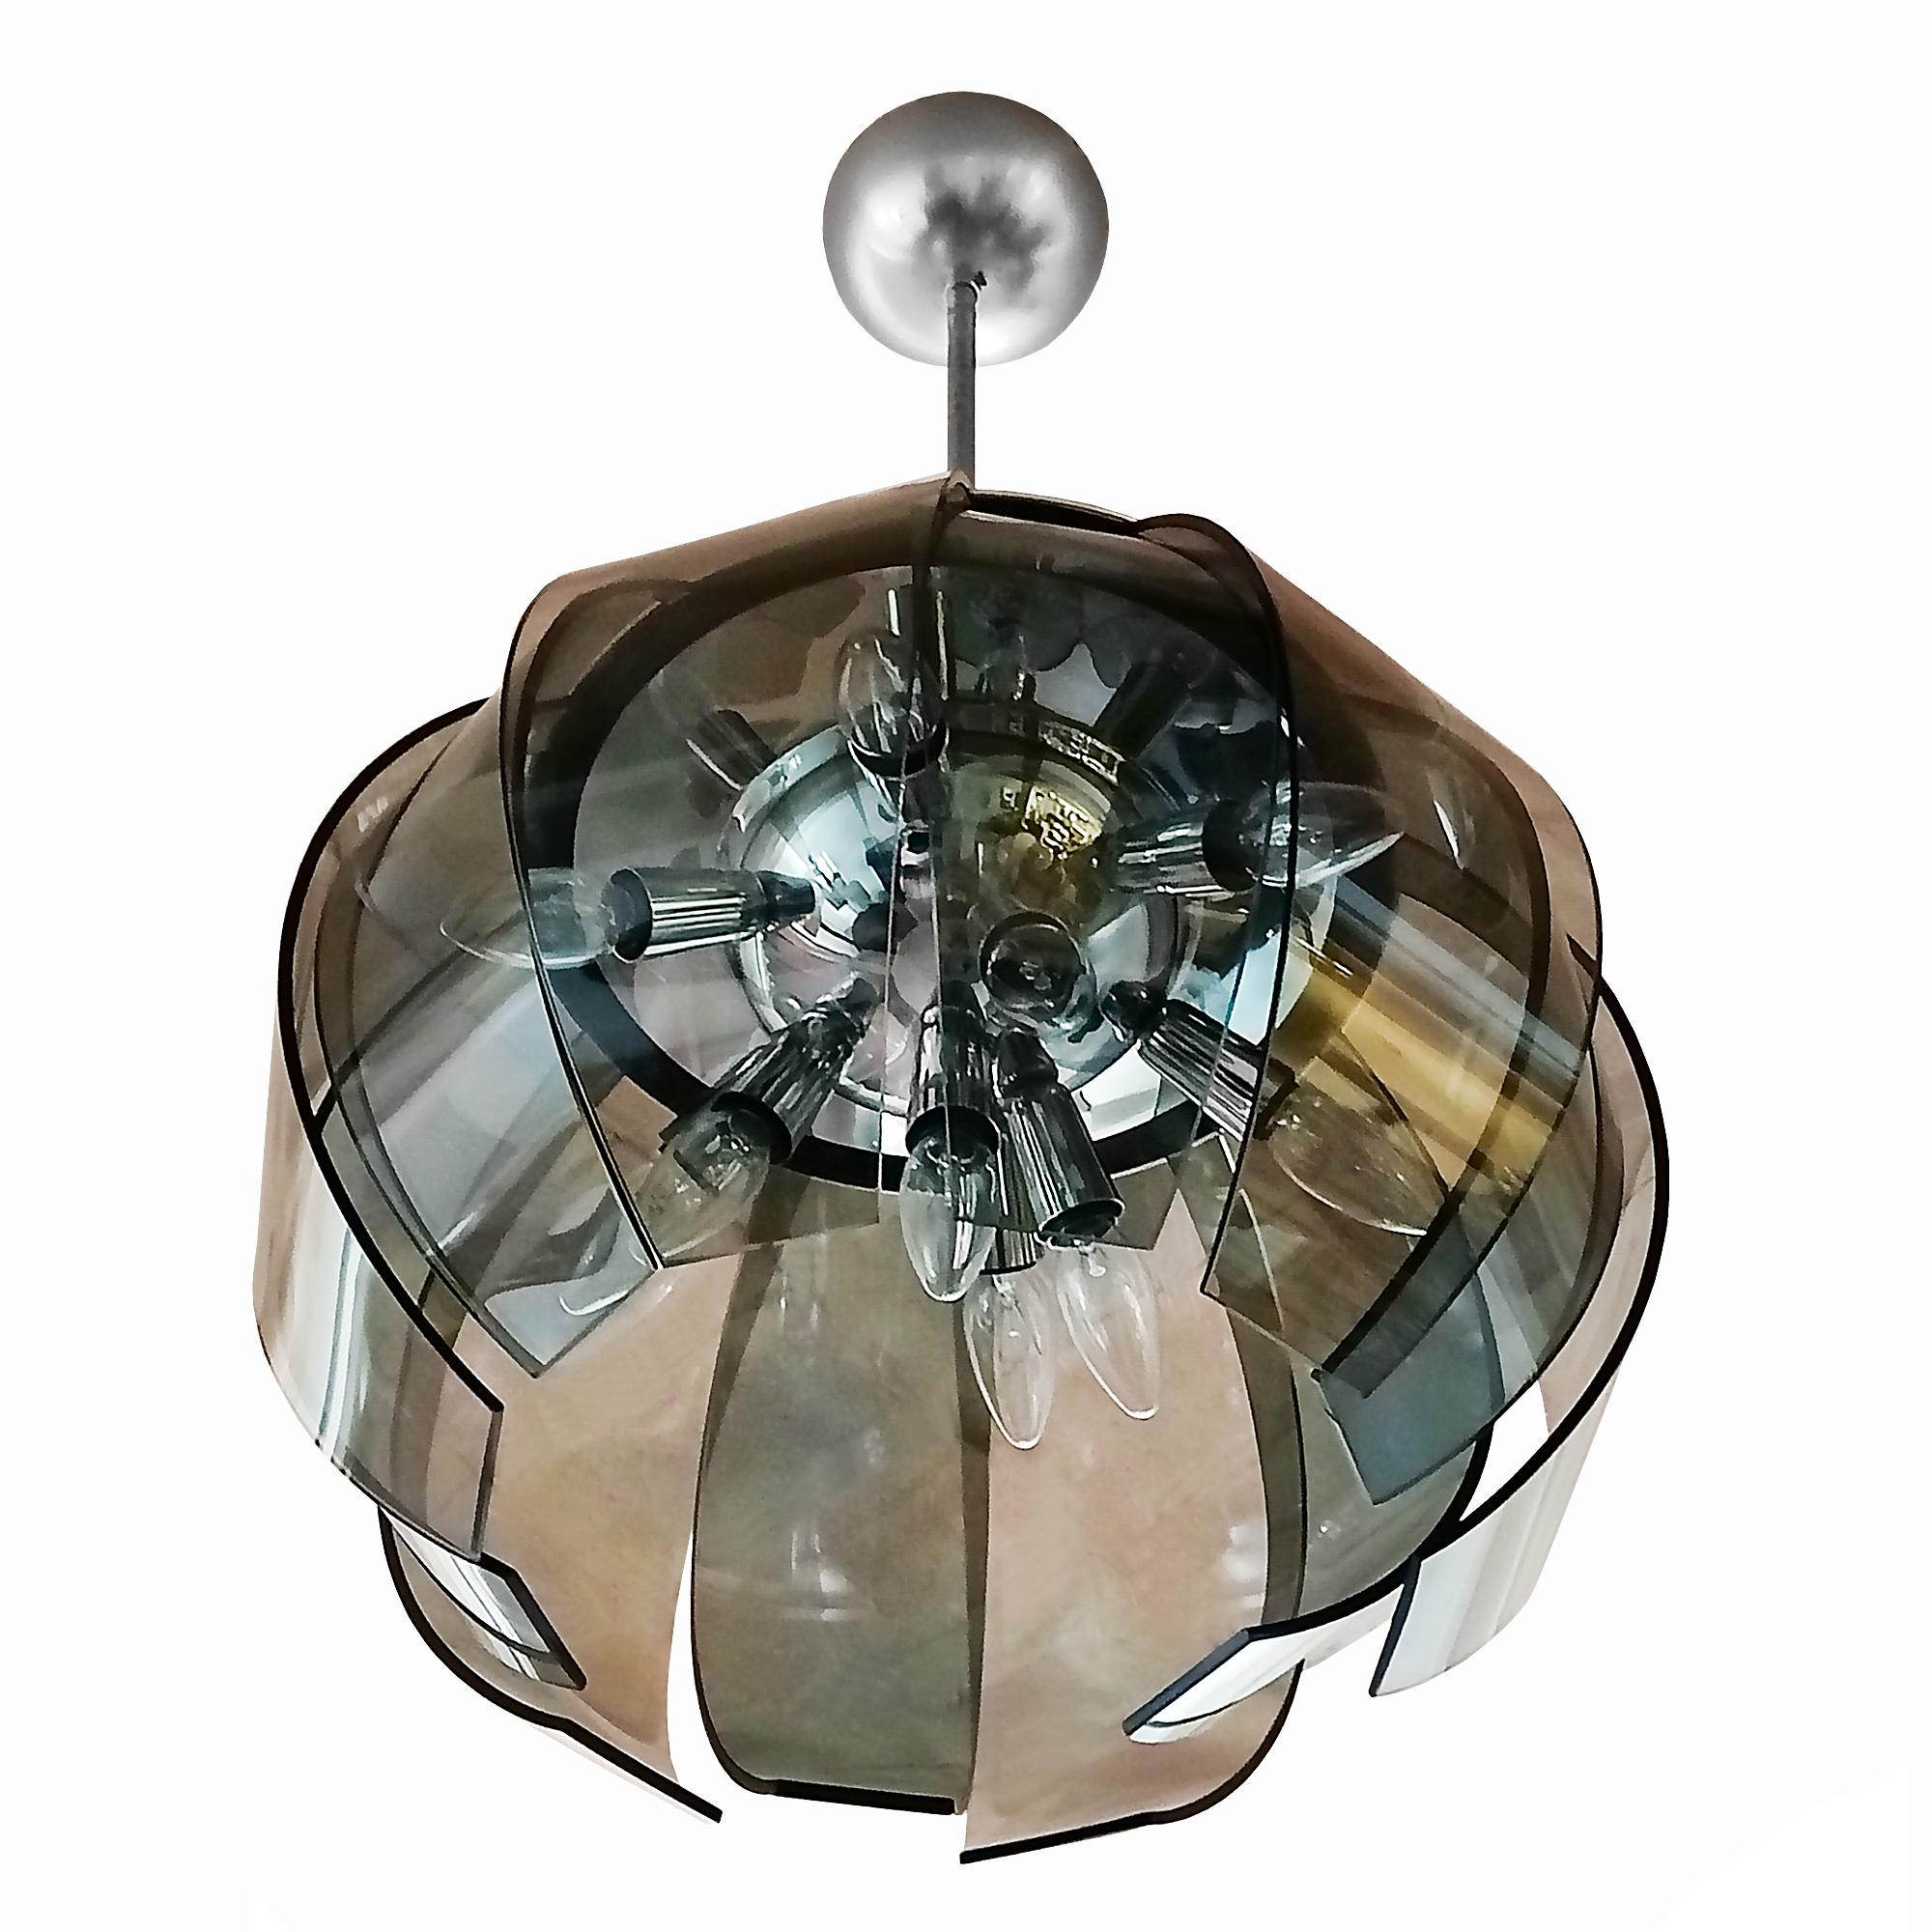 Chandelier-lantern with 12 curved glass plates in pale green and white-smoky gray colour; central axis, upper plate and electrical mounting system in nickel-plated metal (10 bulbs). Very high quality.

Italy c.1950-60.